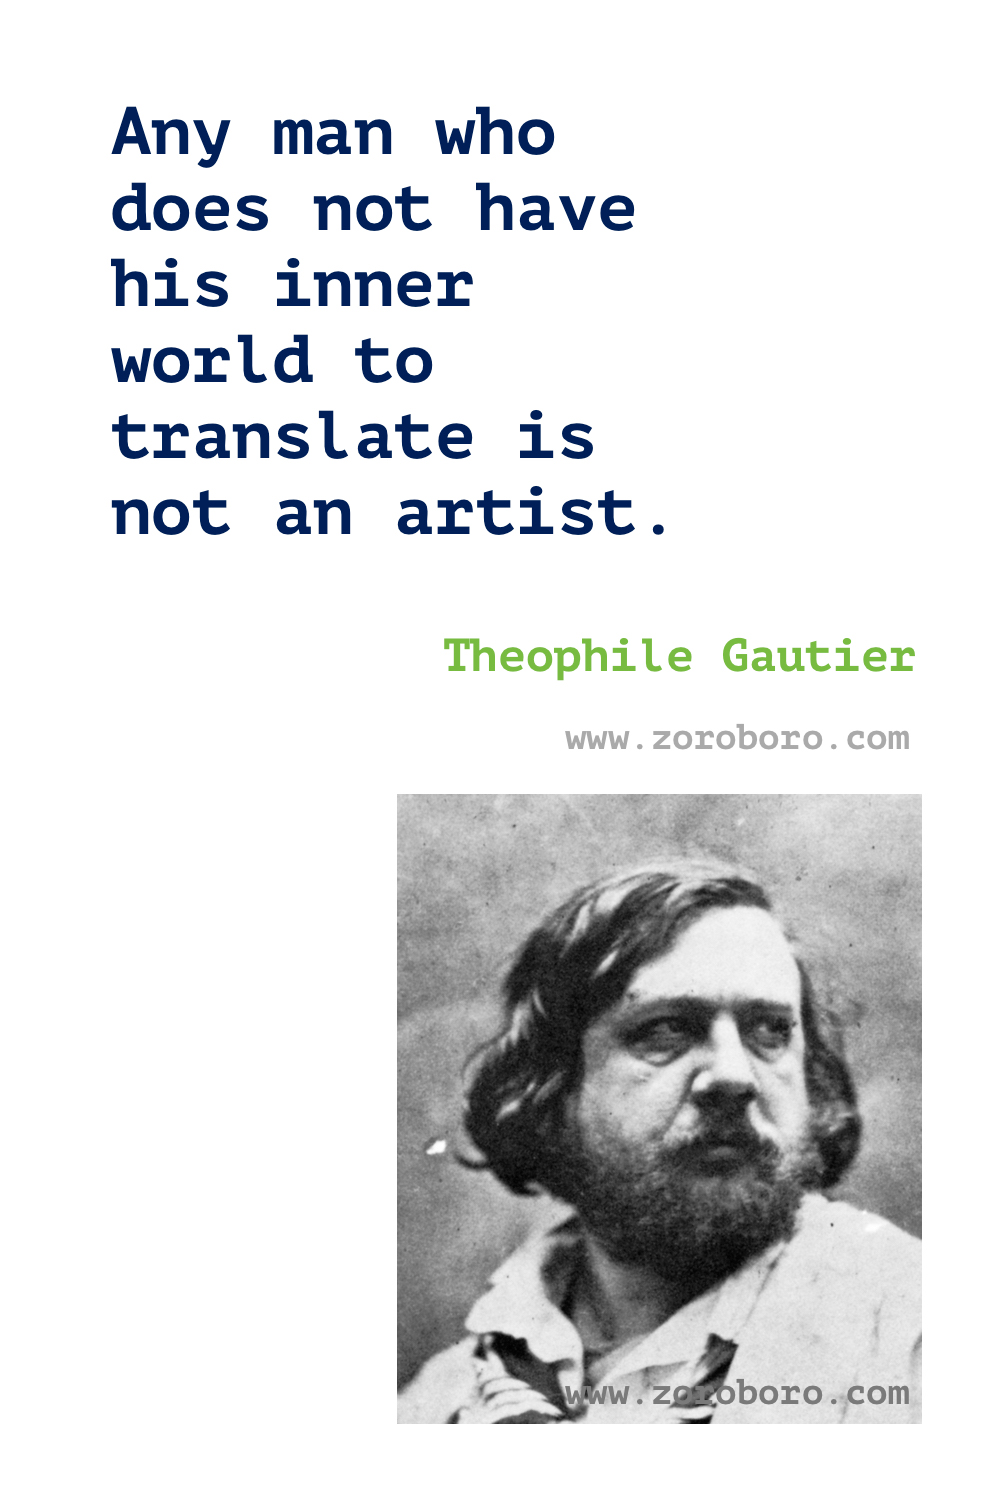 Theophile Gautier Quotes, Theophile Gautier Poems, Theophile Gautier Poetry, Theophile Gautier Books Quotes, Poésie, Theophile Gautier .